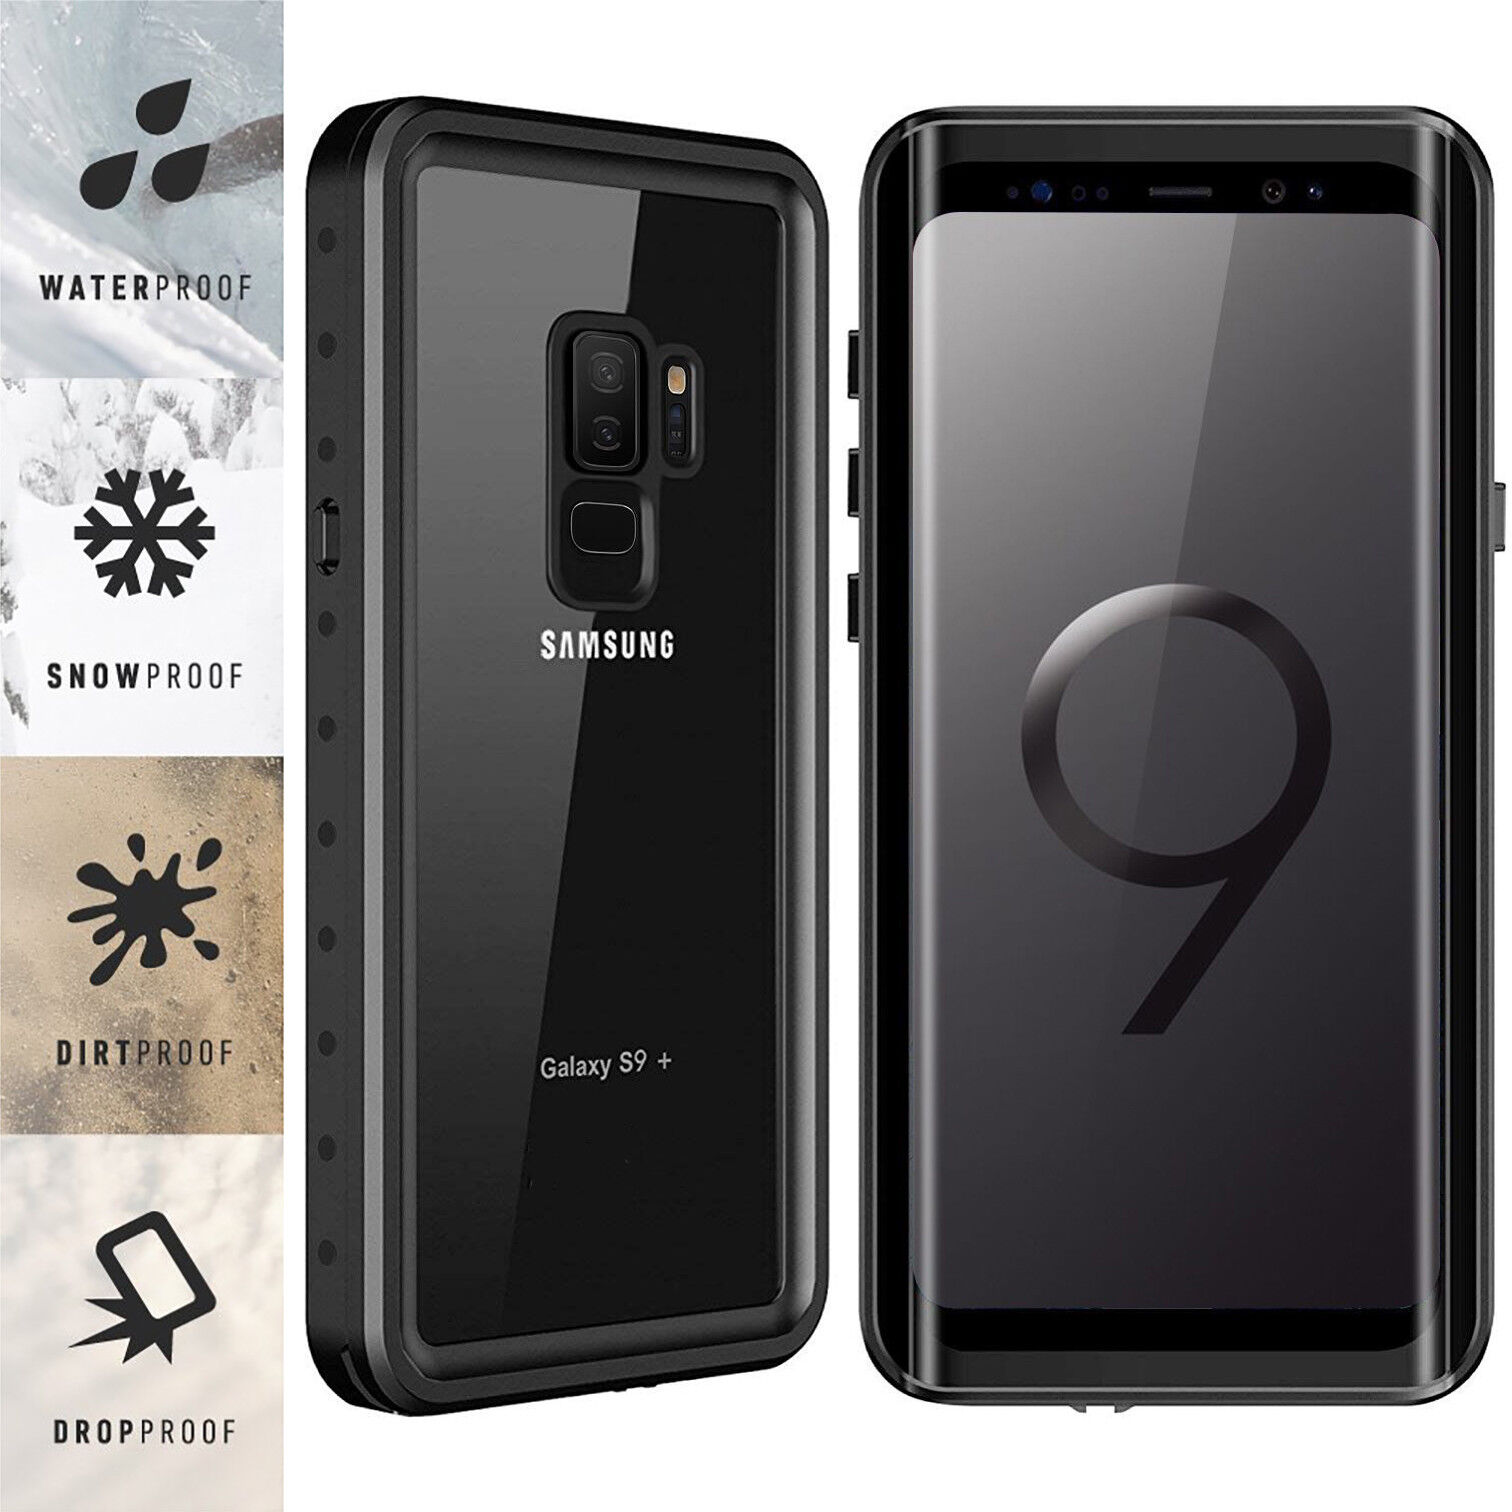 For Samsung Galaxy S9 / S9 Plus Waterproof Case Cover Built-in Screen Protector